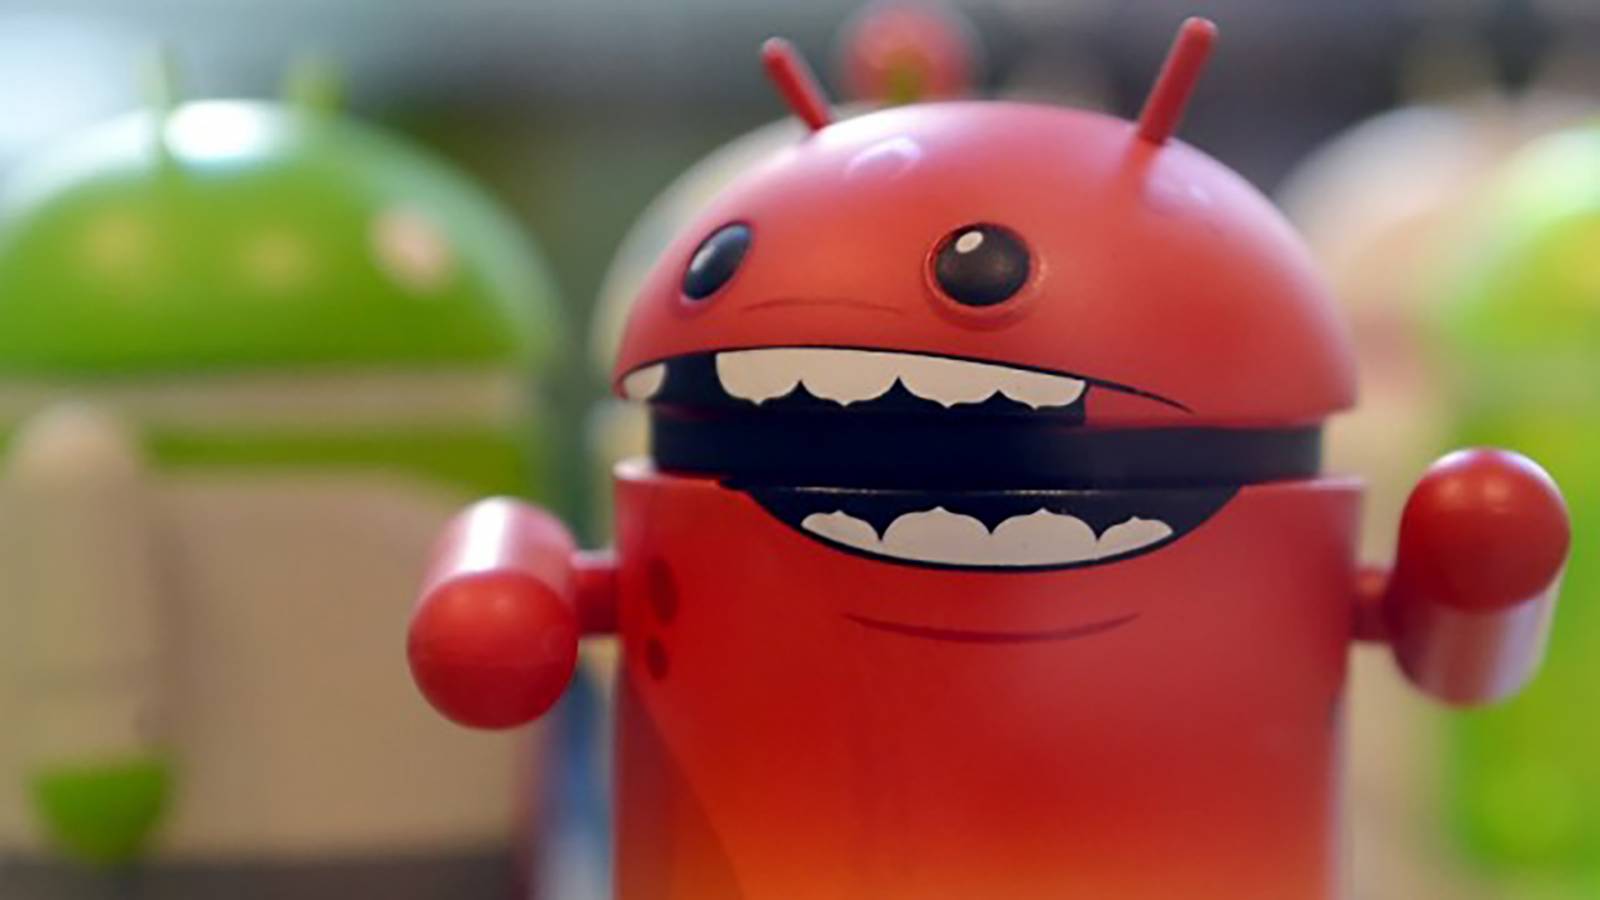 Android alerts tens of millions of people